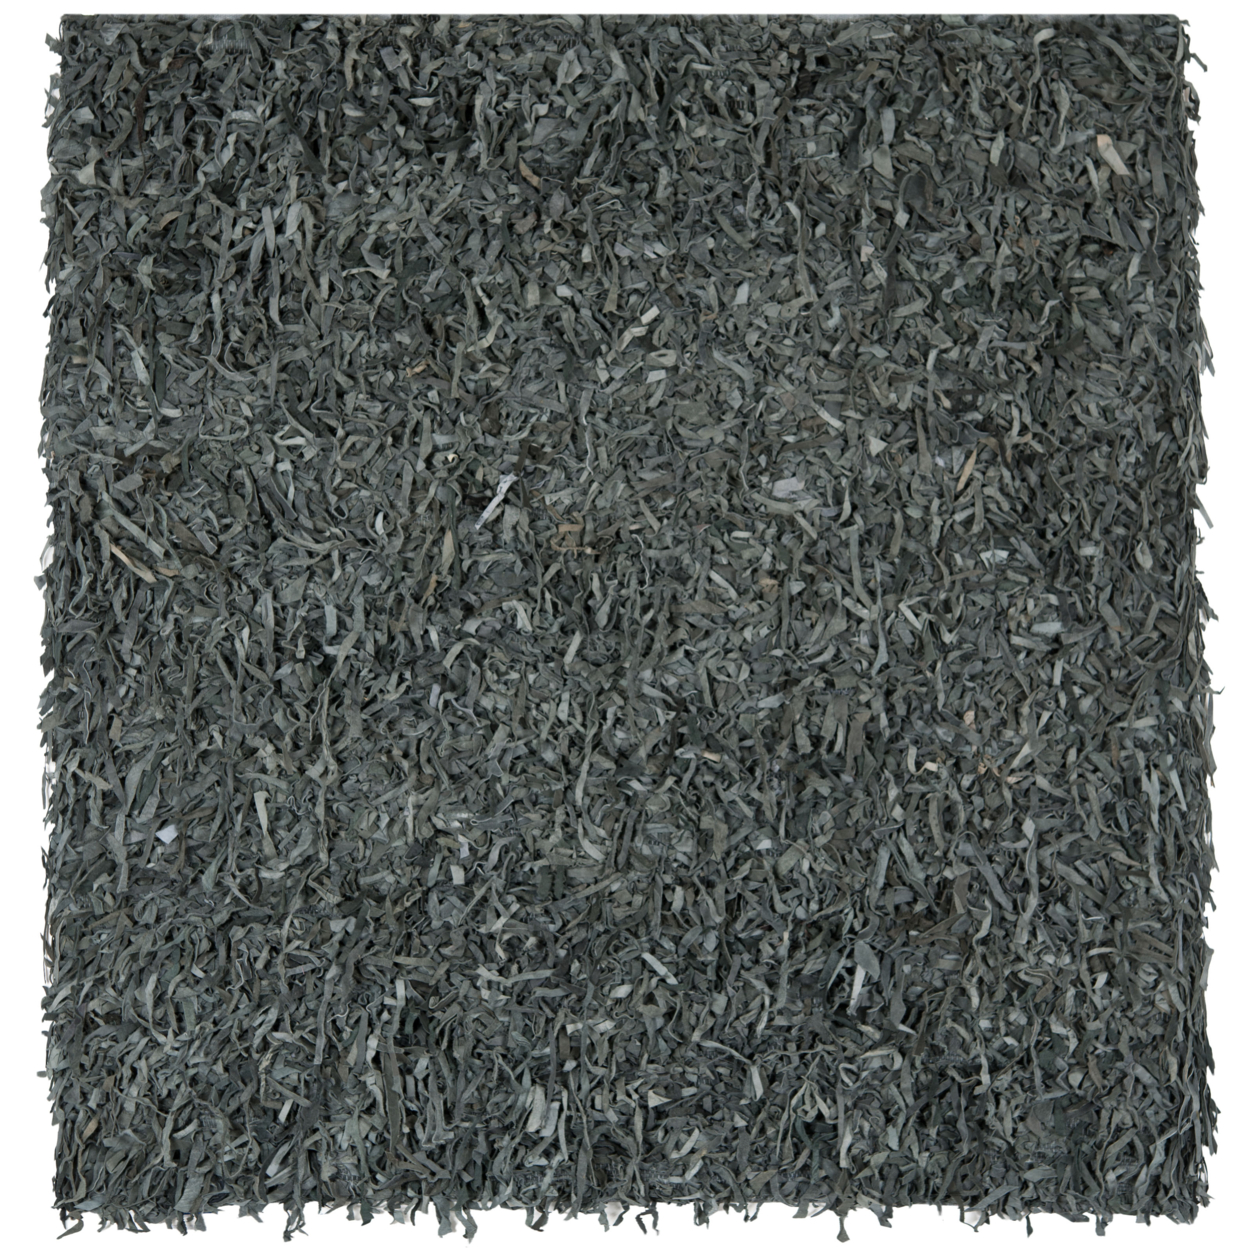 SAFAVIEH Leather Shag LSG511N Hand-knotted Grey Rug - 6' Square